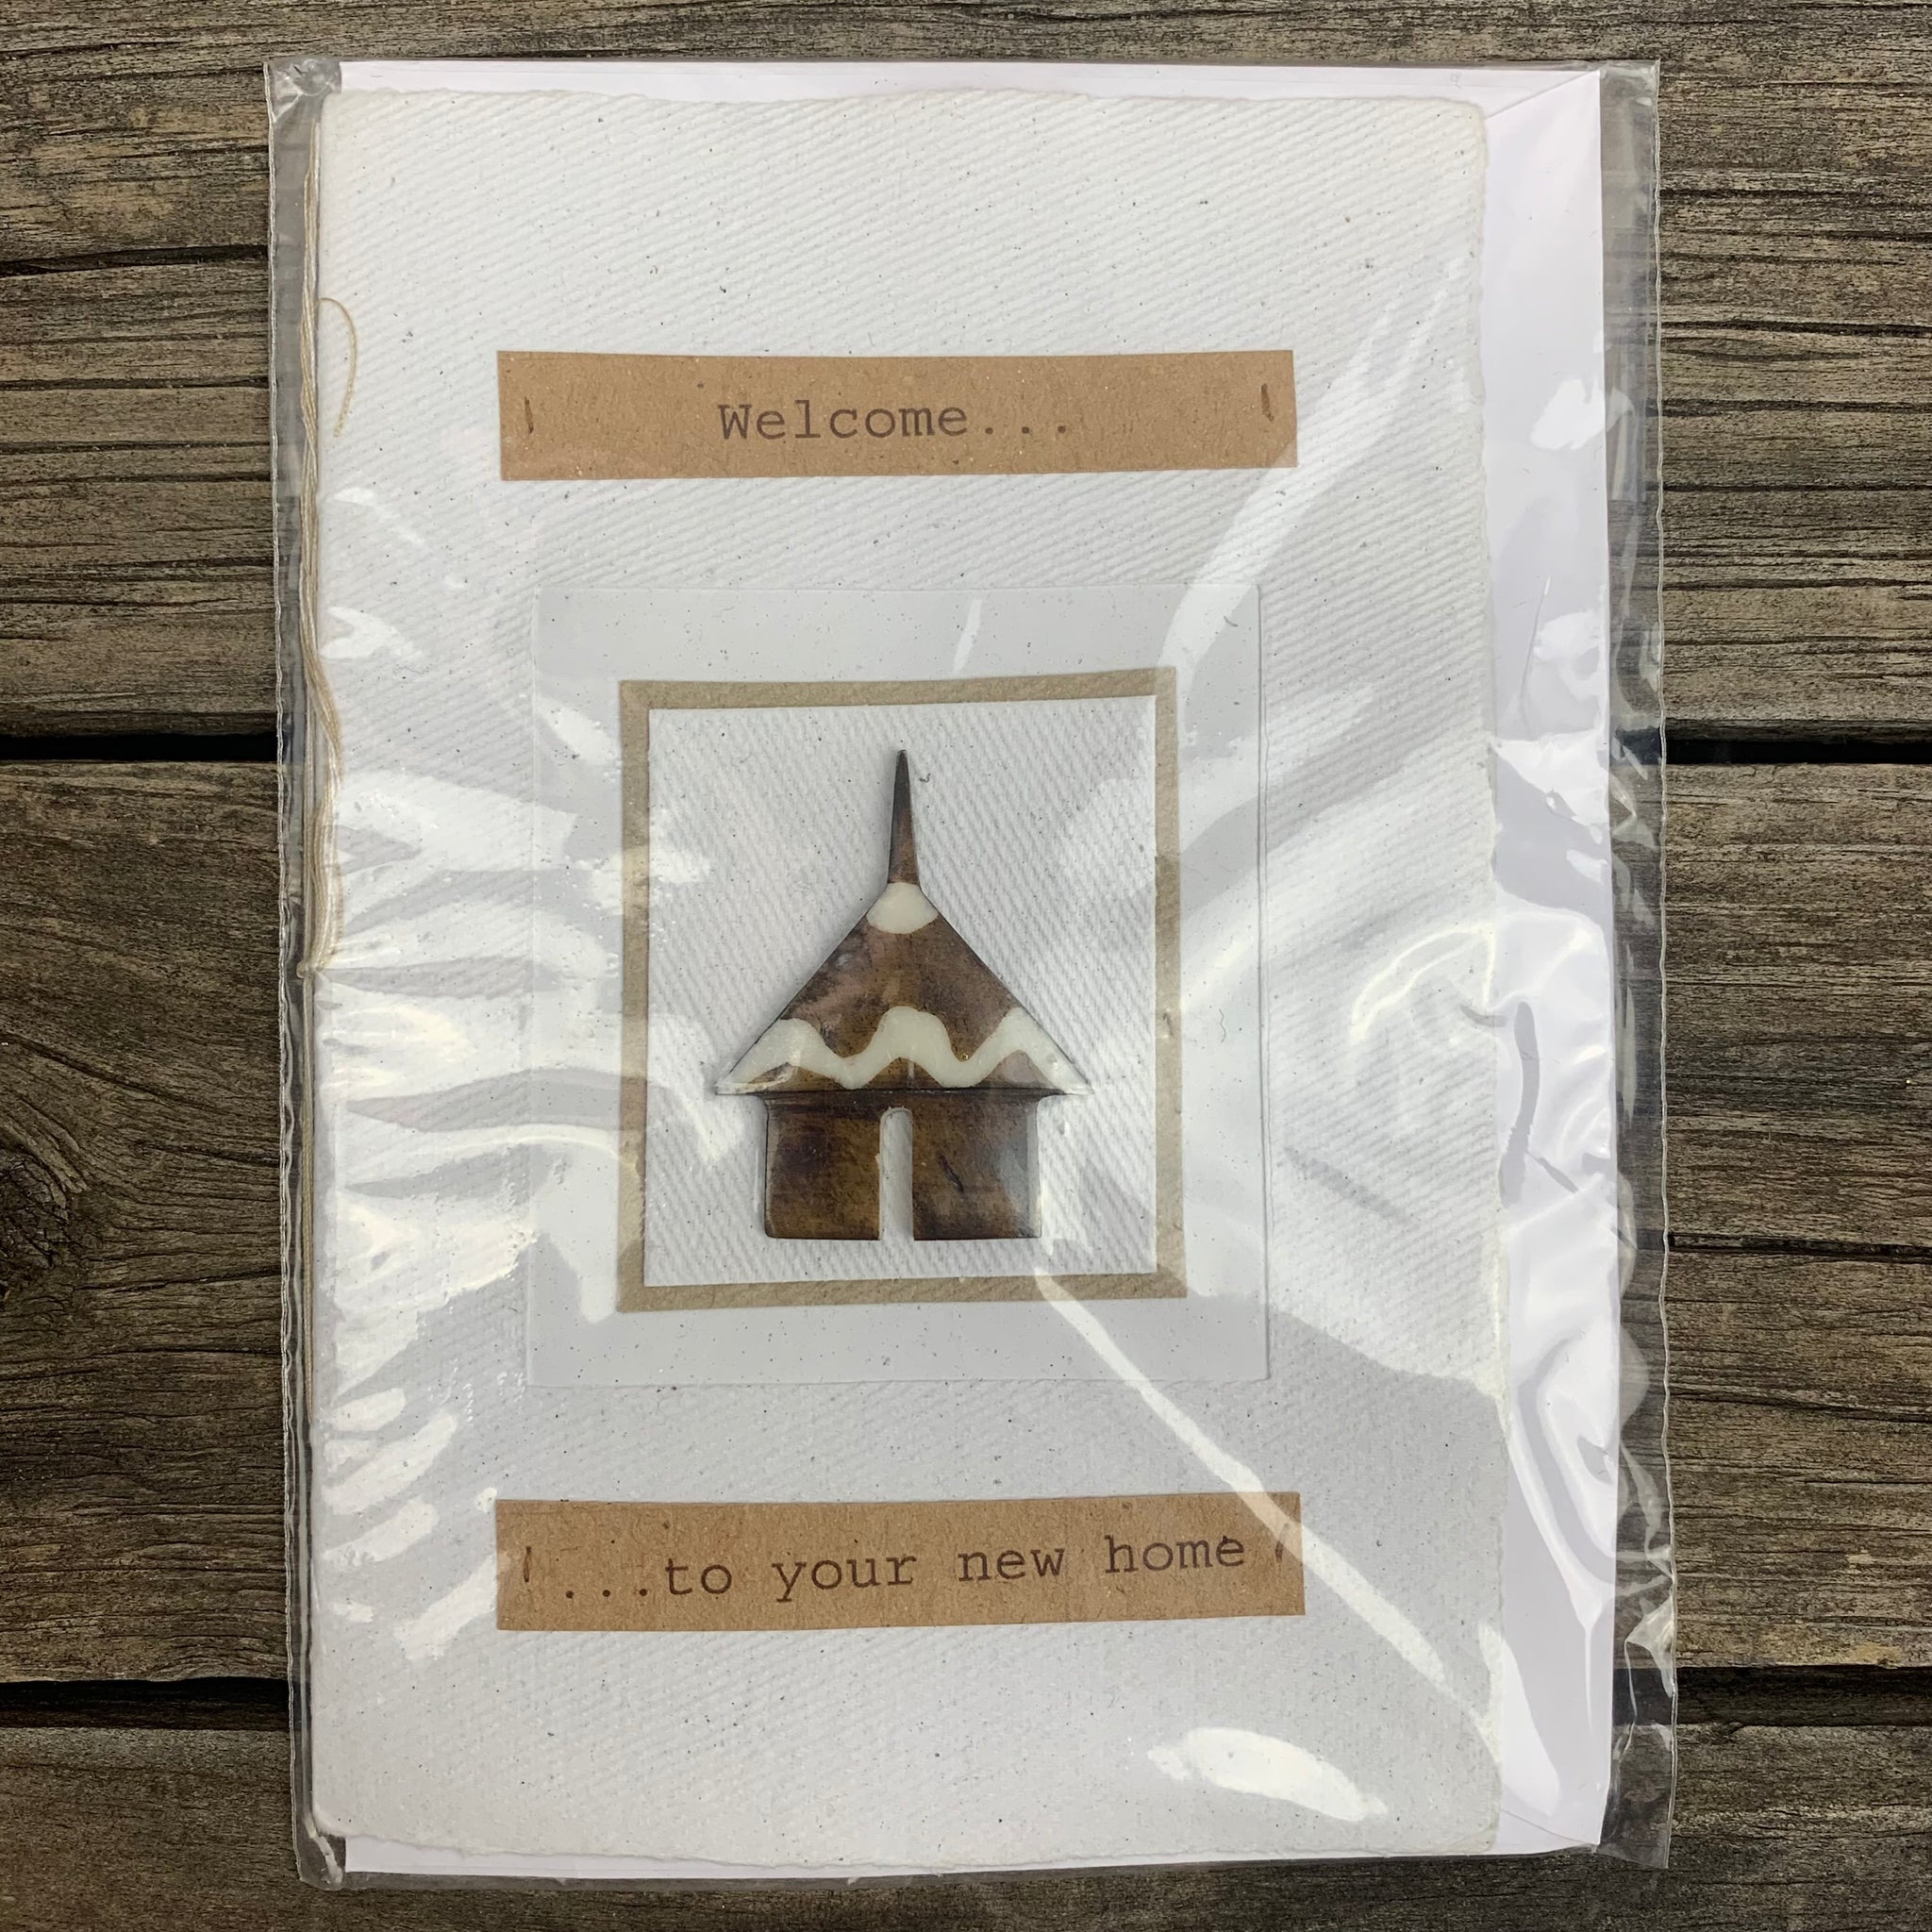 greeting card displaying message - 'welcome to your new home'. The card is white with text bordered by brown recycled paper. In the centre of the card there is a small tribal house that protrudes from the surface 